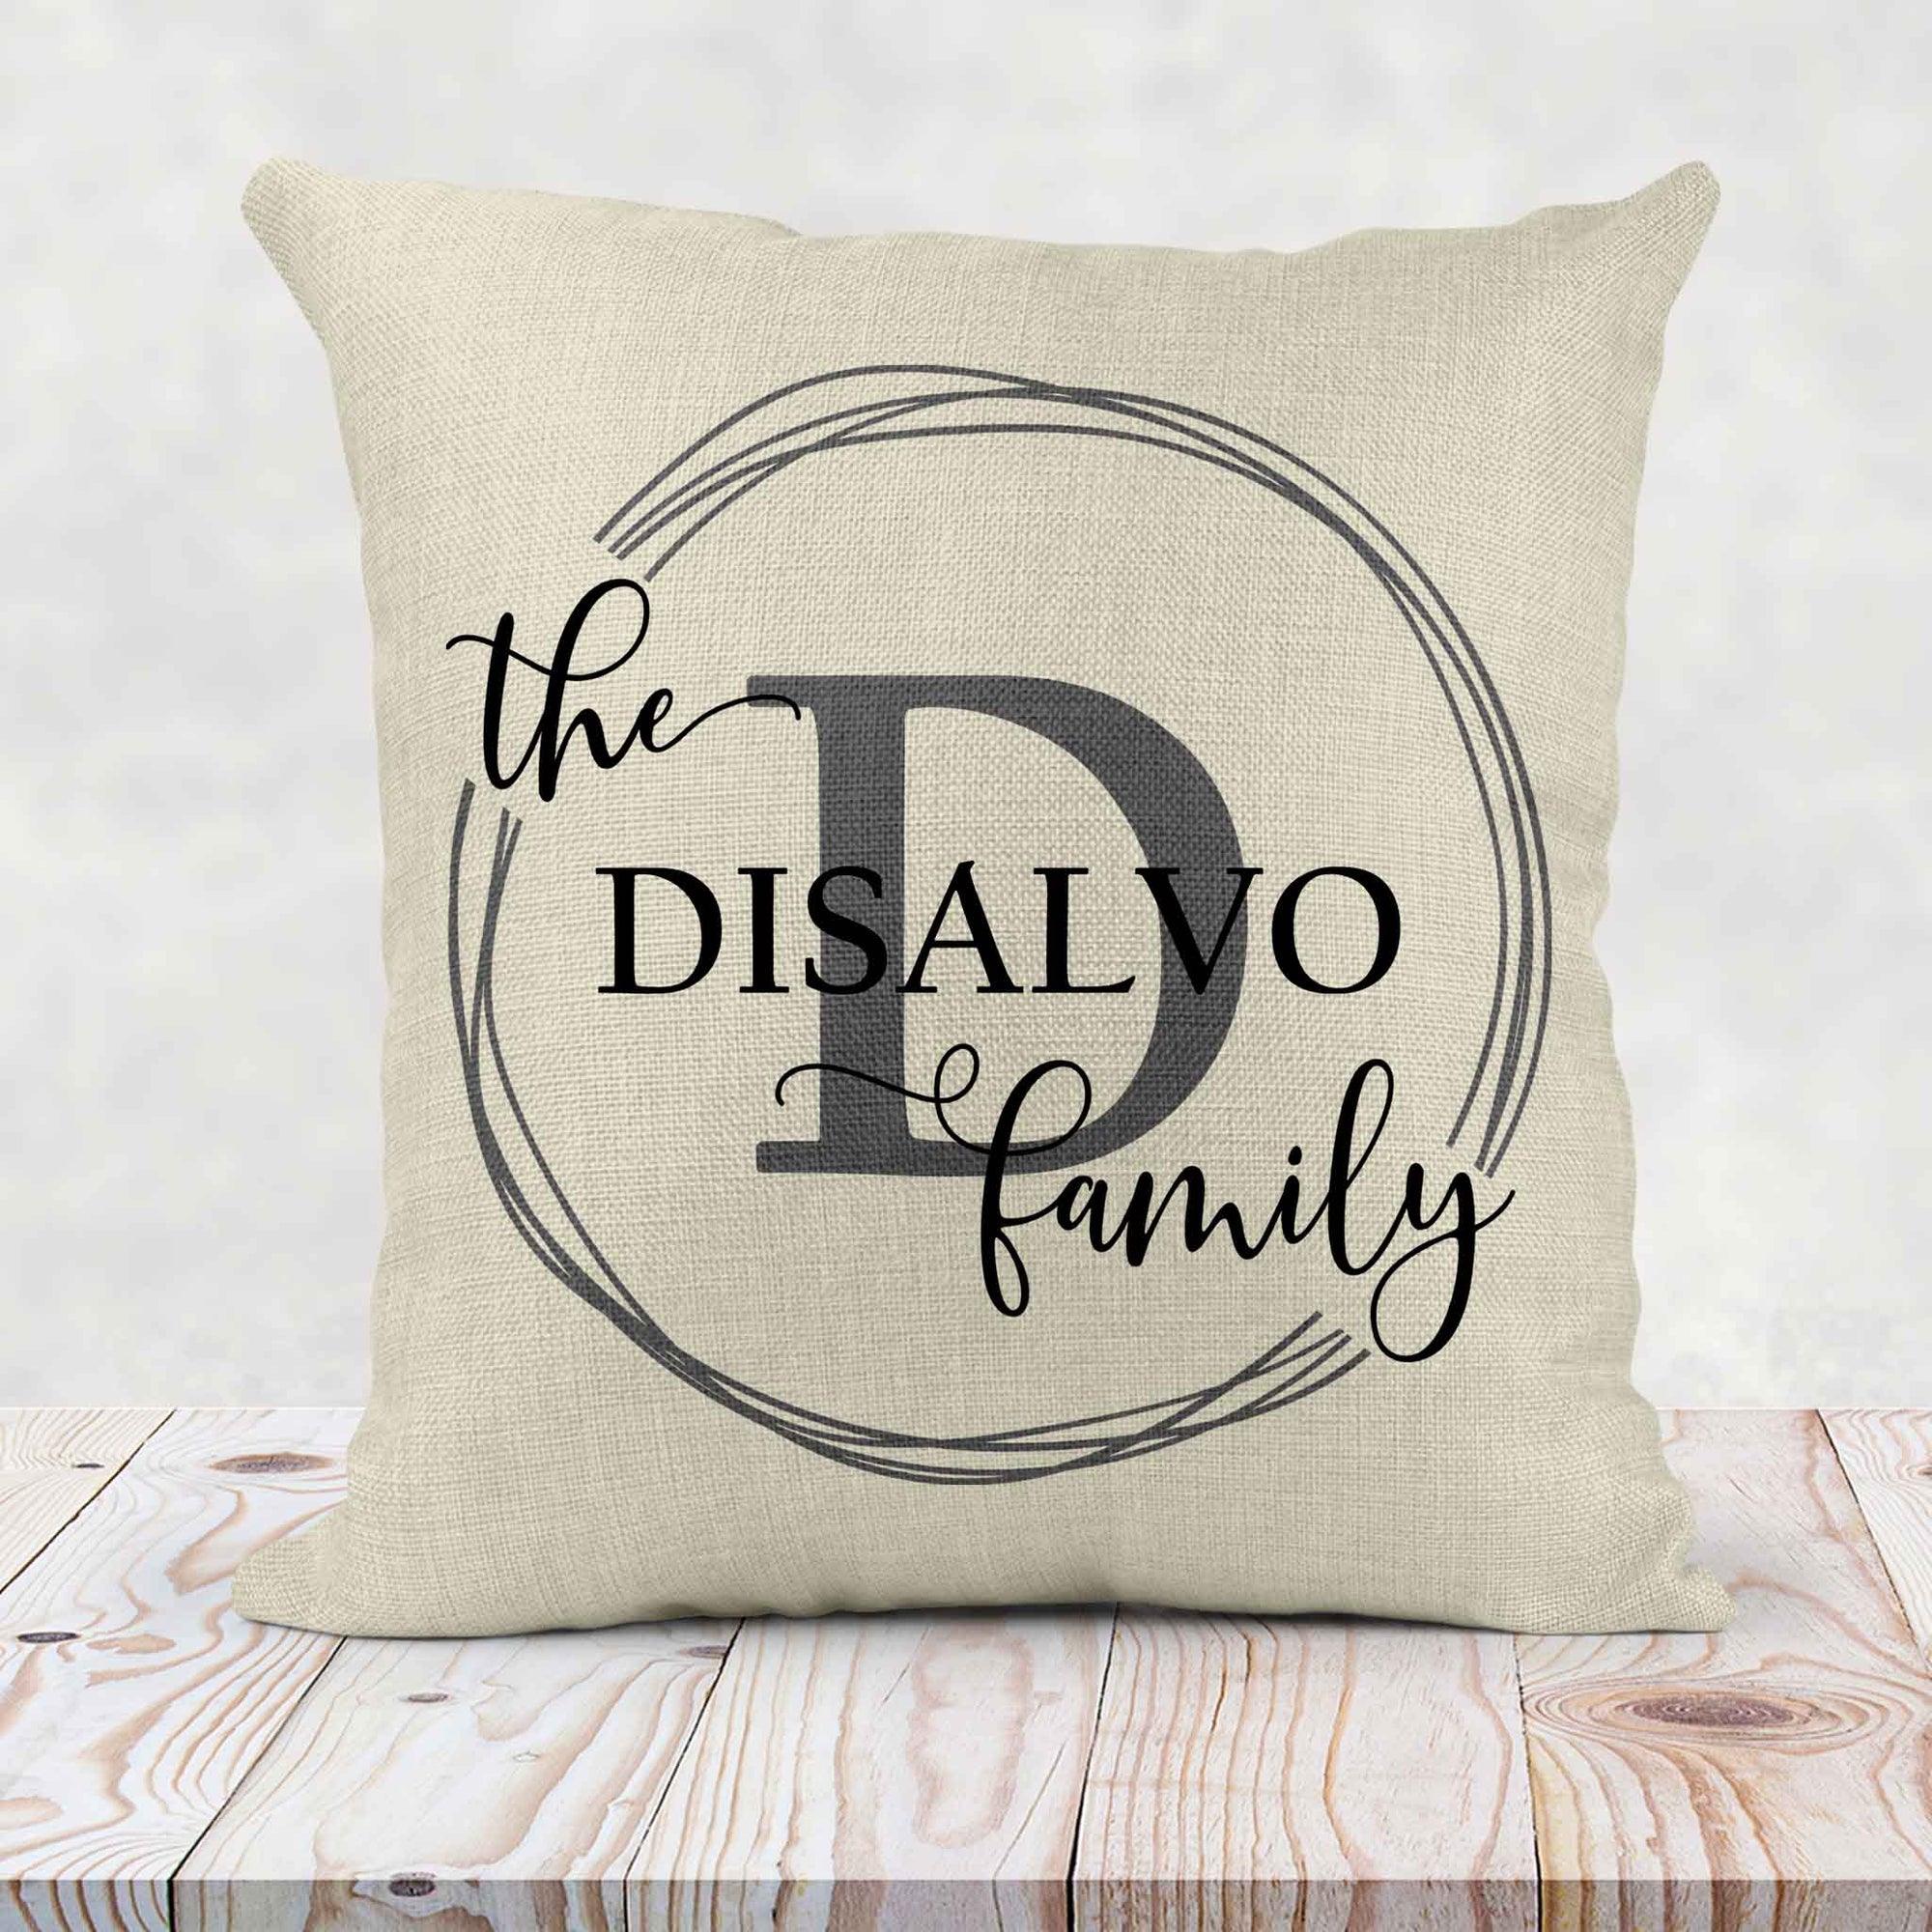 Decorative Pillows - This & That Solutions - Personalized Gifts & Custom Home Decor